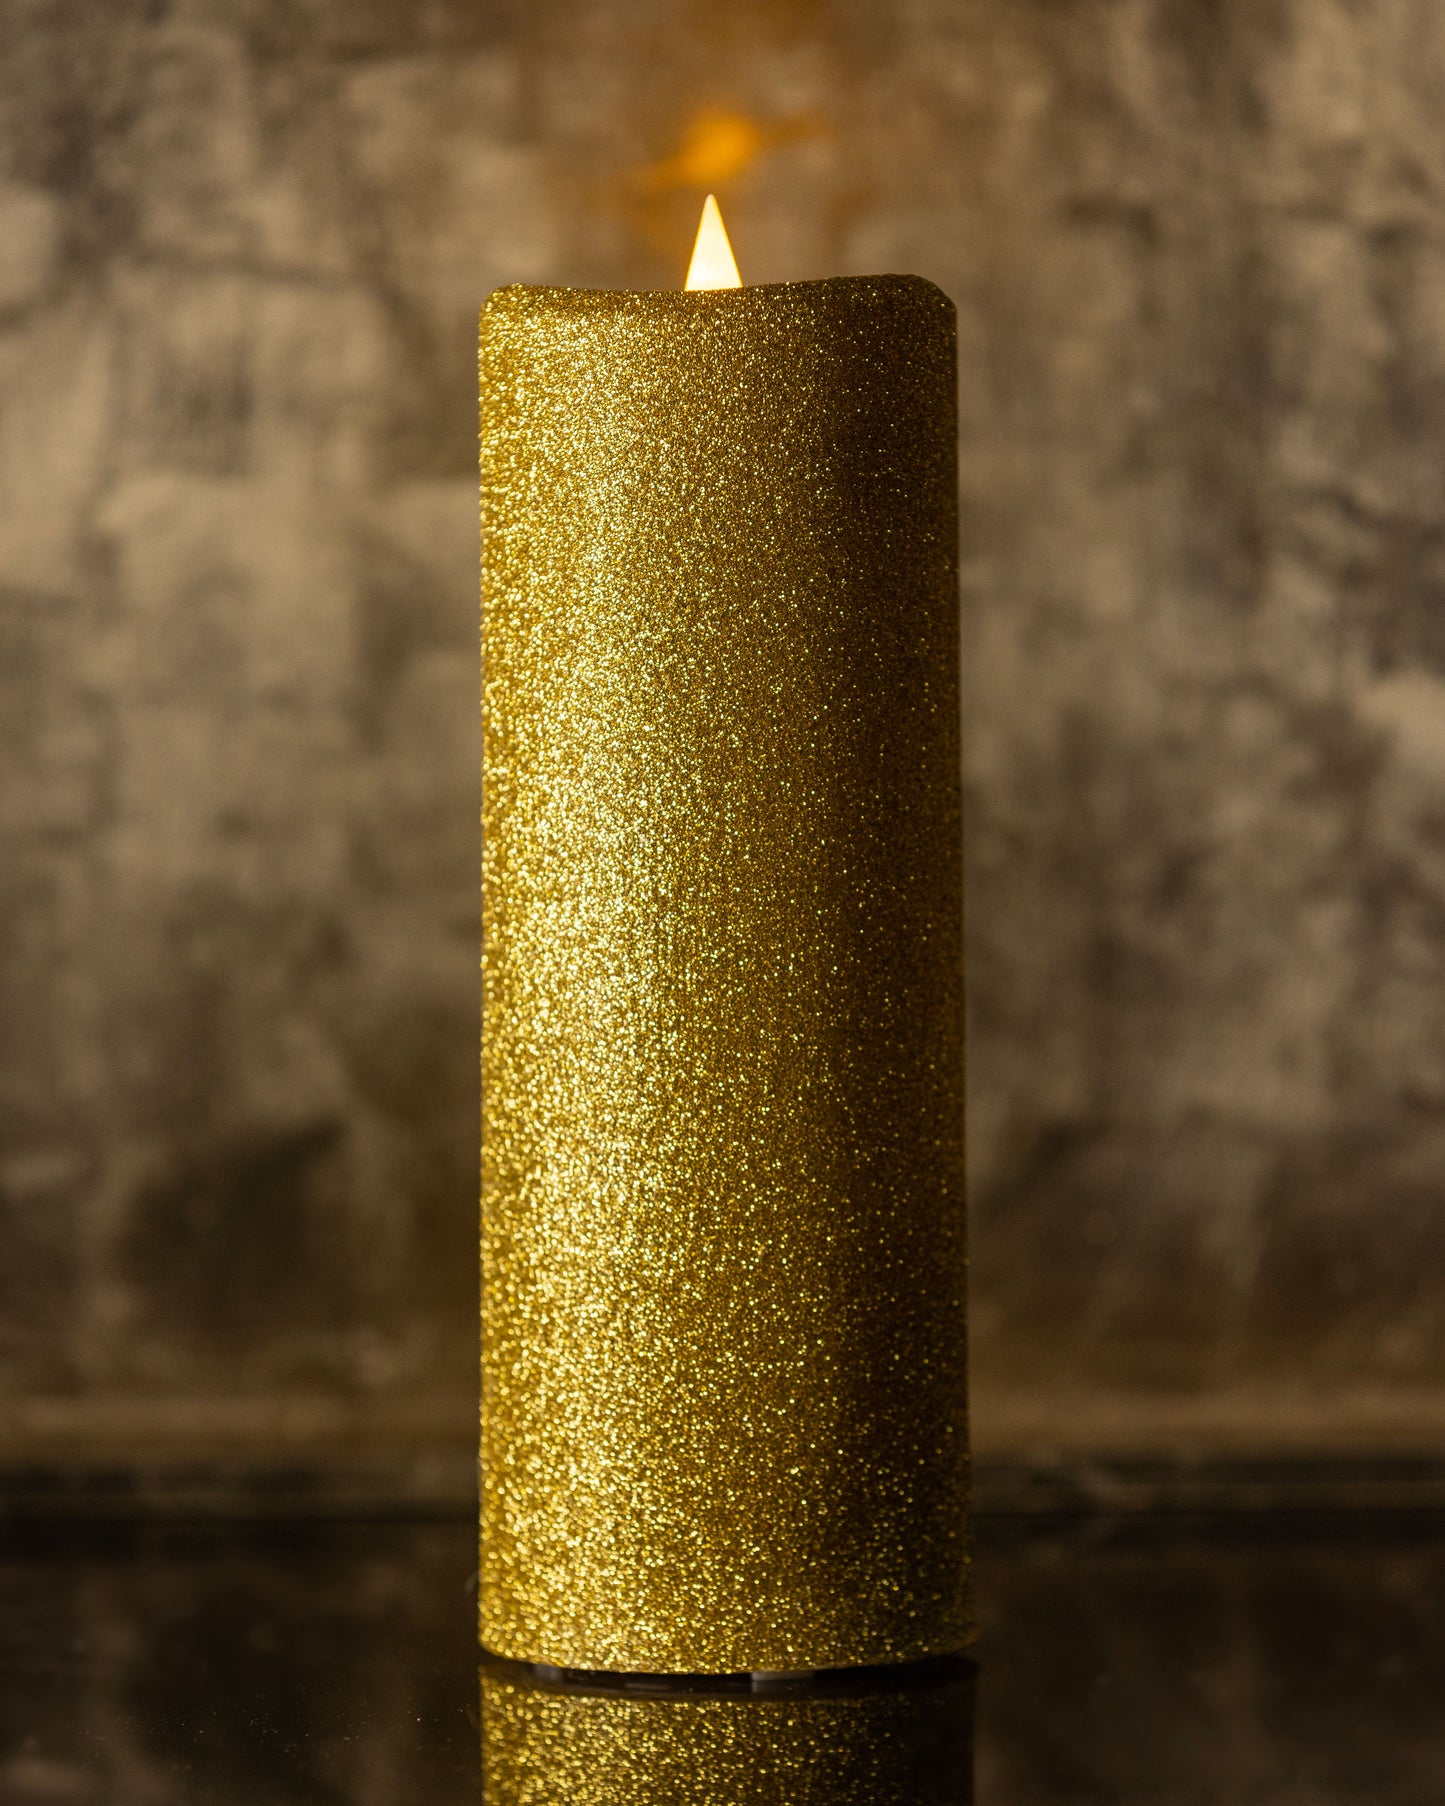 Classic Motion Flameless Candle